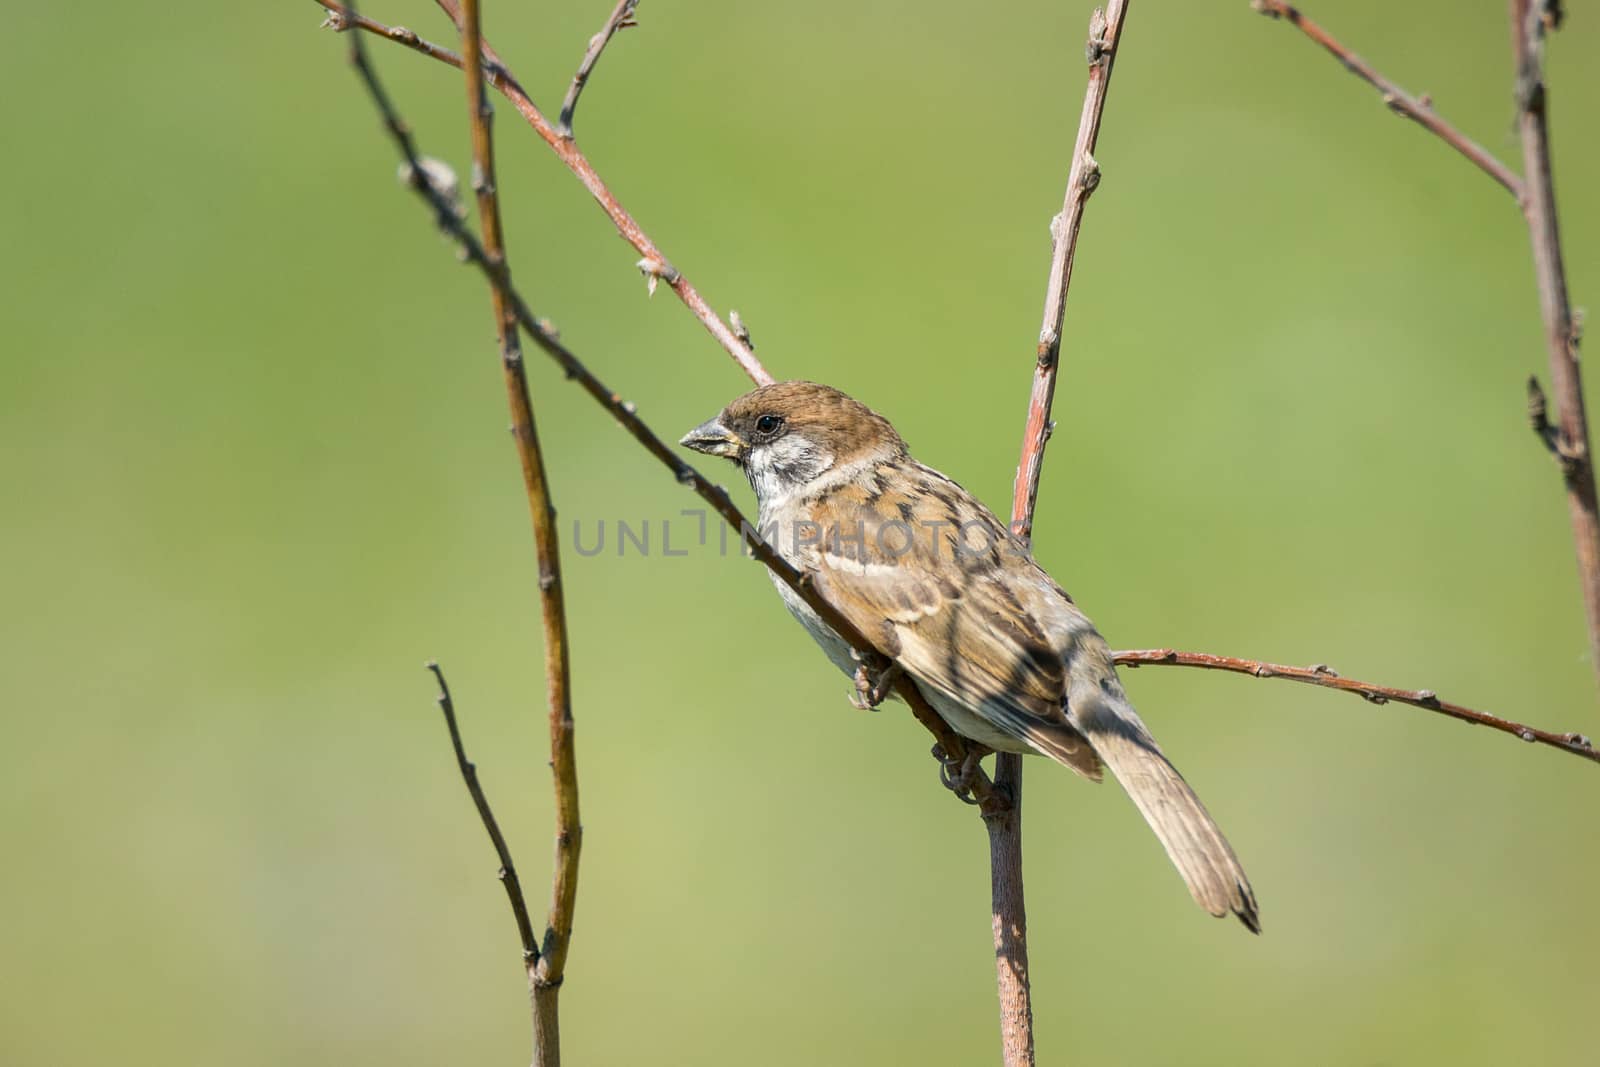 Sparrow on a branch on a green background, Russia, village, summer